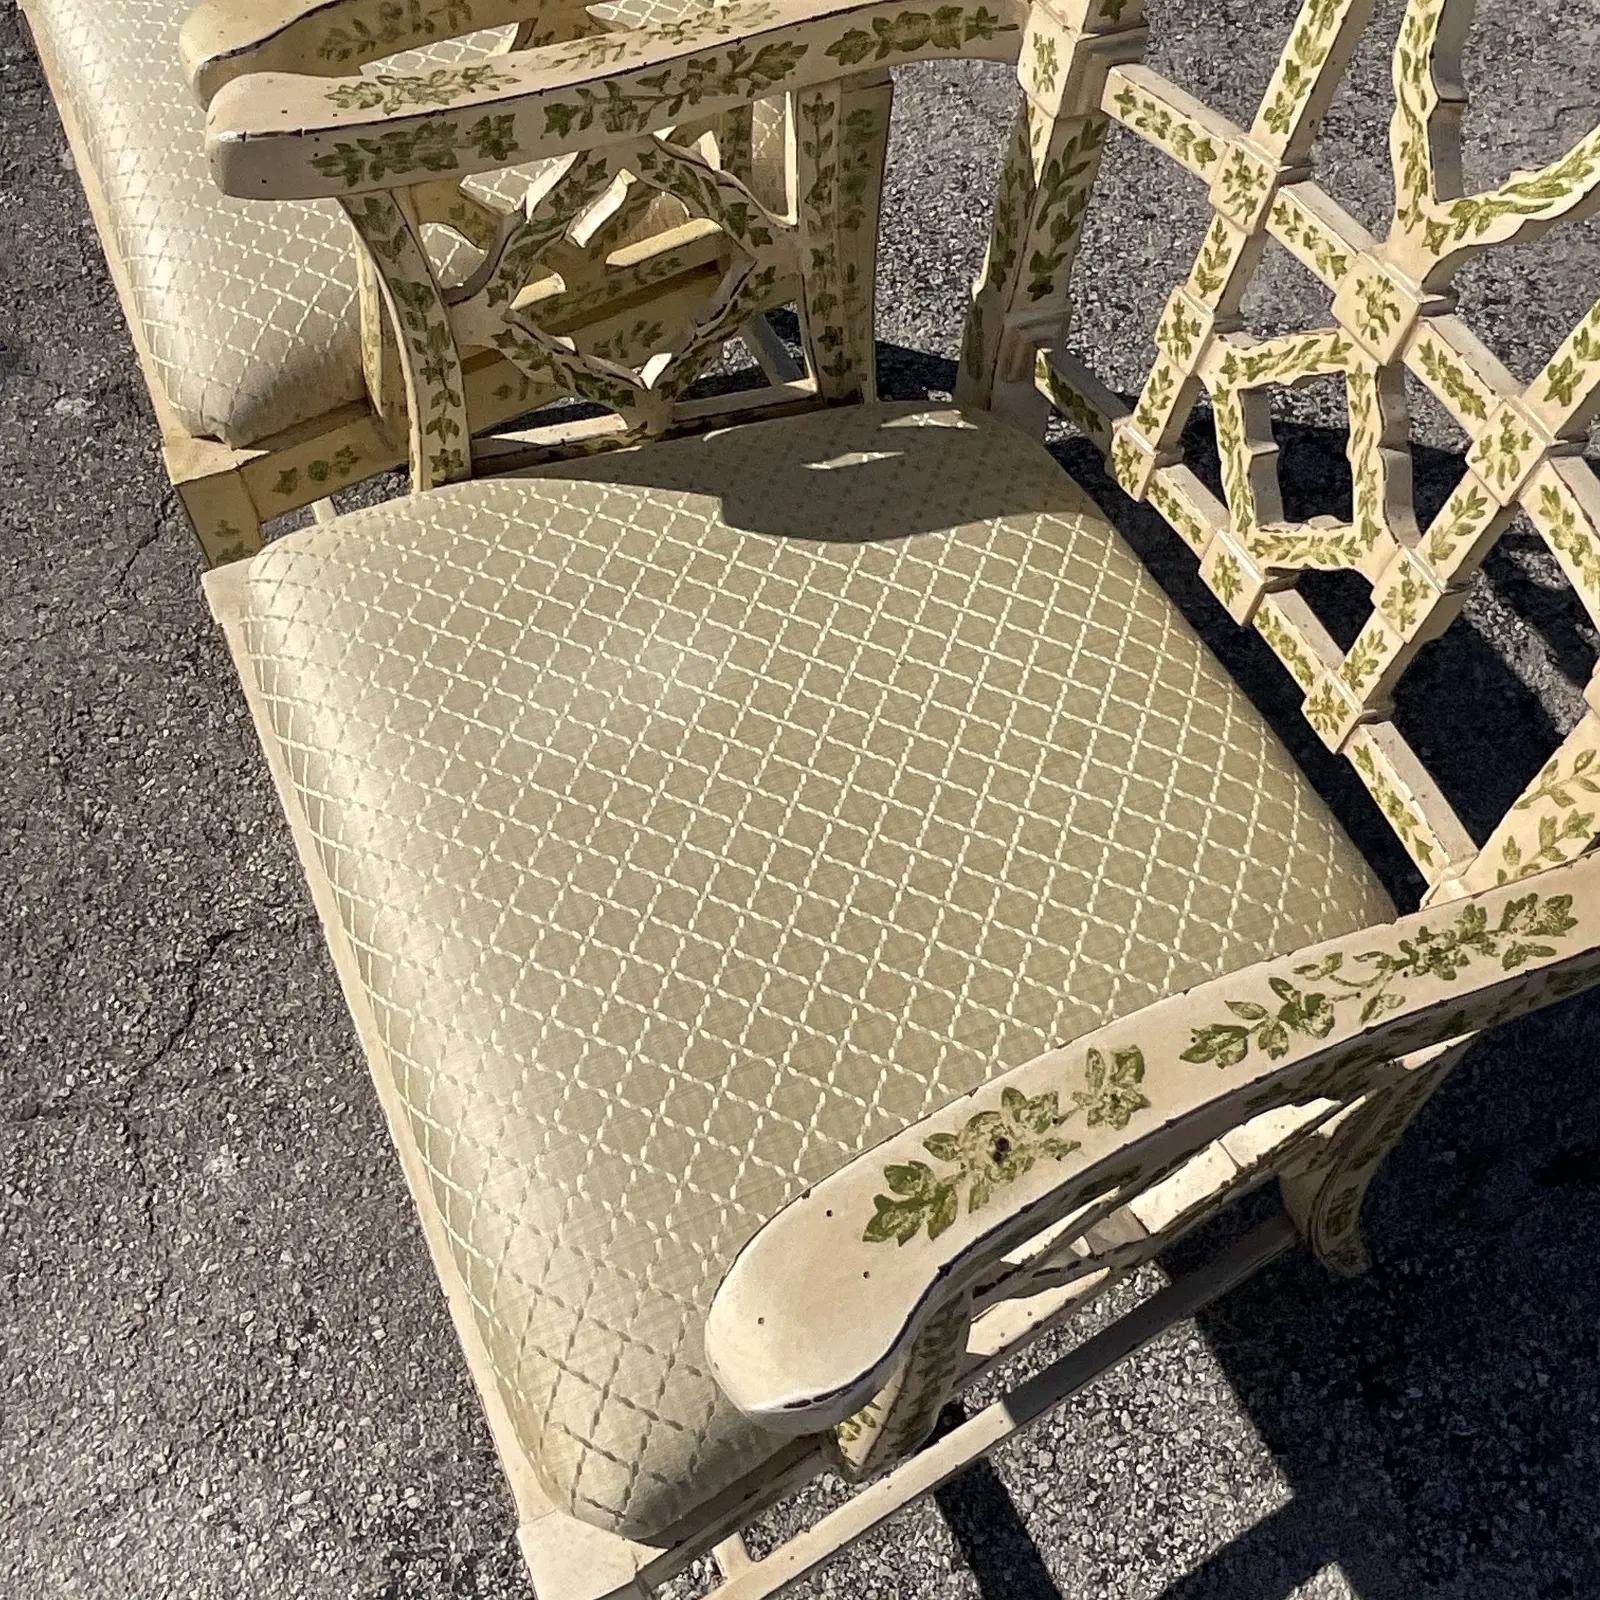 A fabulous vintage Regency pair of hand painted arm chairs. Made by the iconic LaBarge group. Beautiful pale yellow with charming green leaf trellis detail. Assigned on the bottom. Acquired from a Palm Beach estate.

The chairs are in excellent